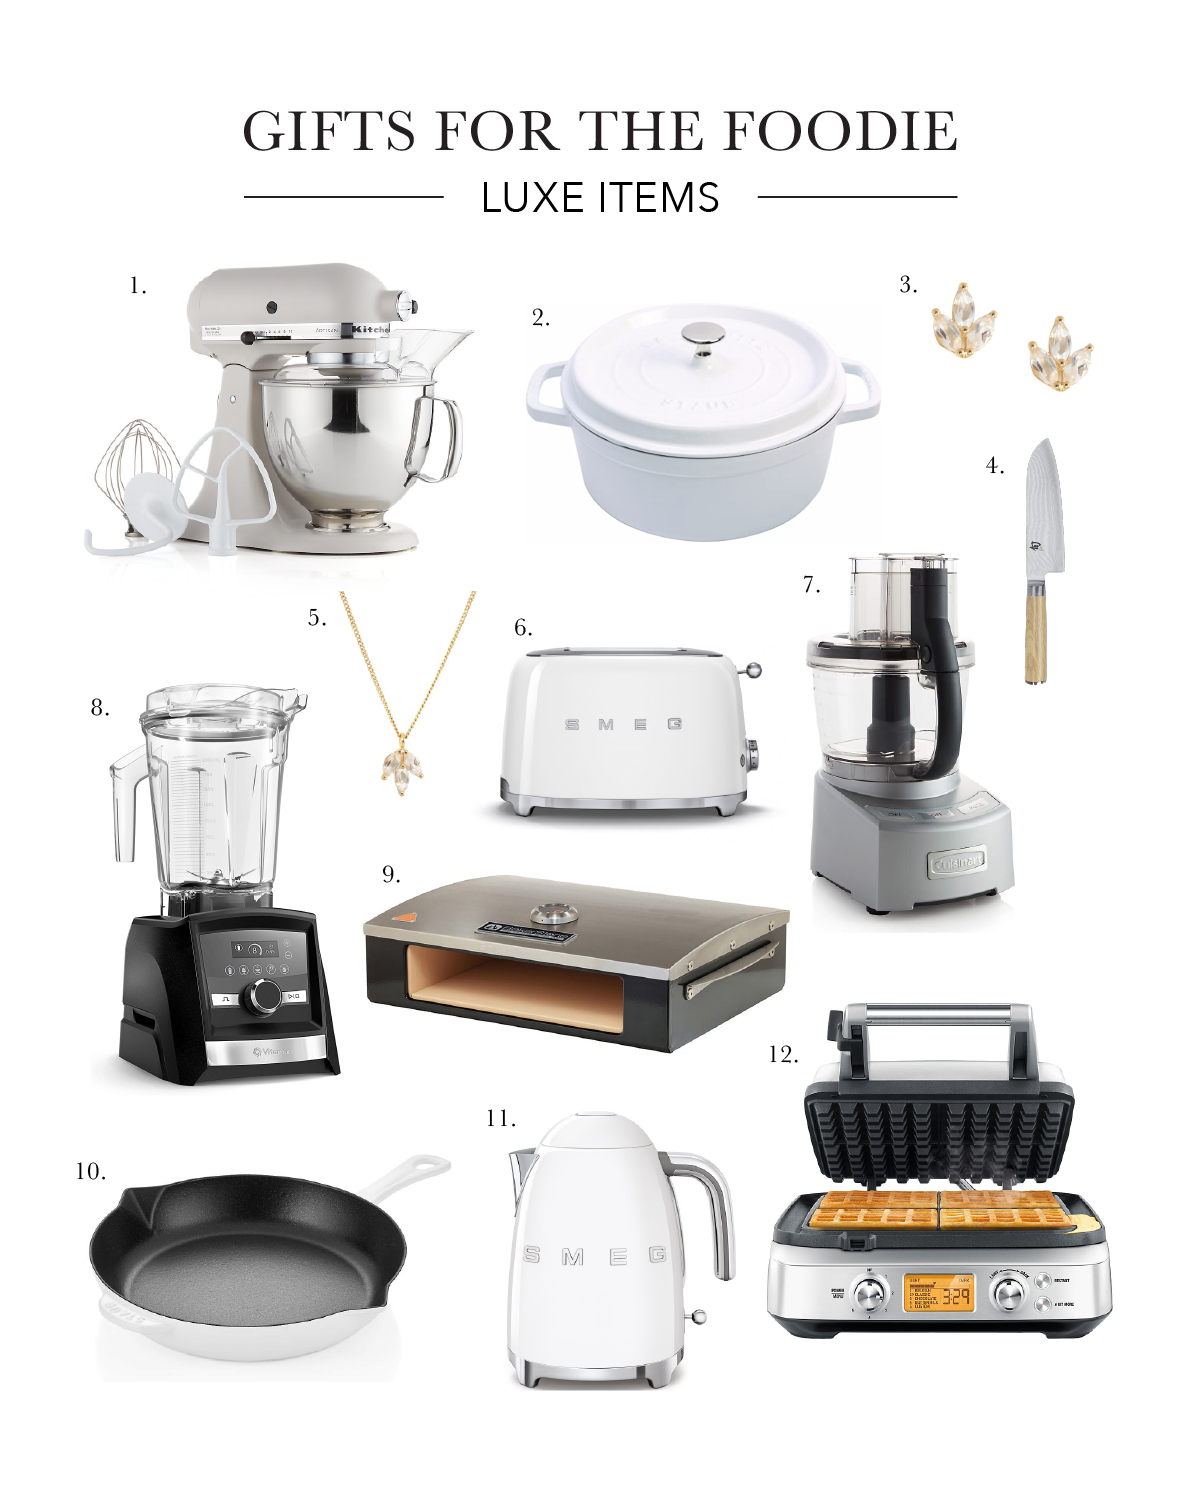 Luxe Gift Guide for the Foodie